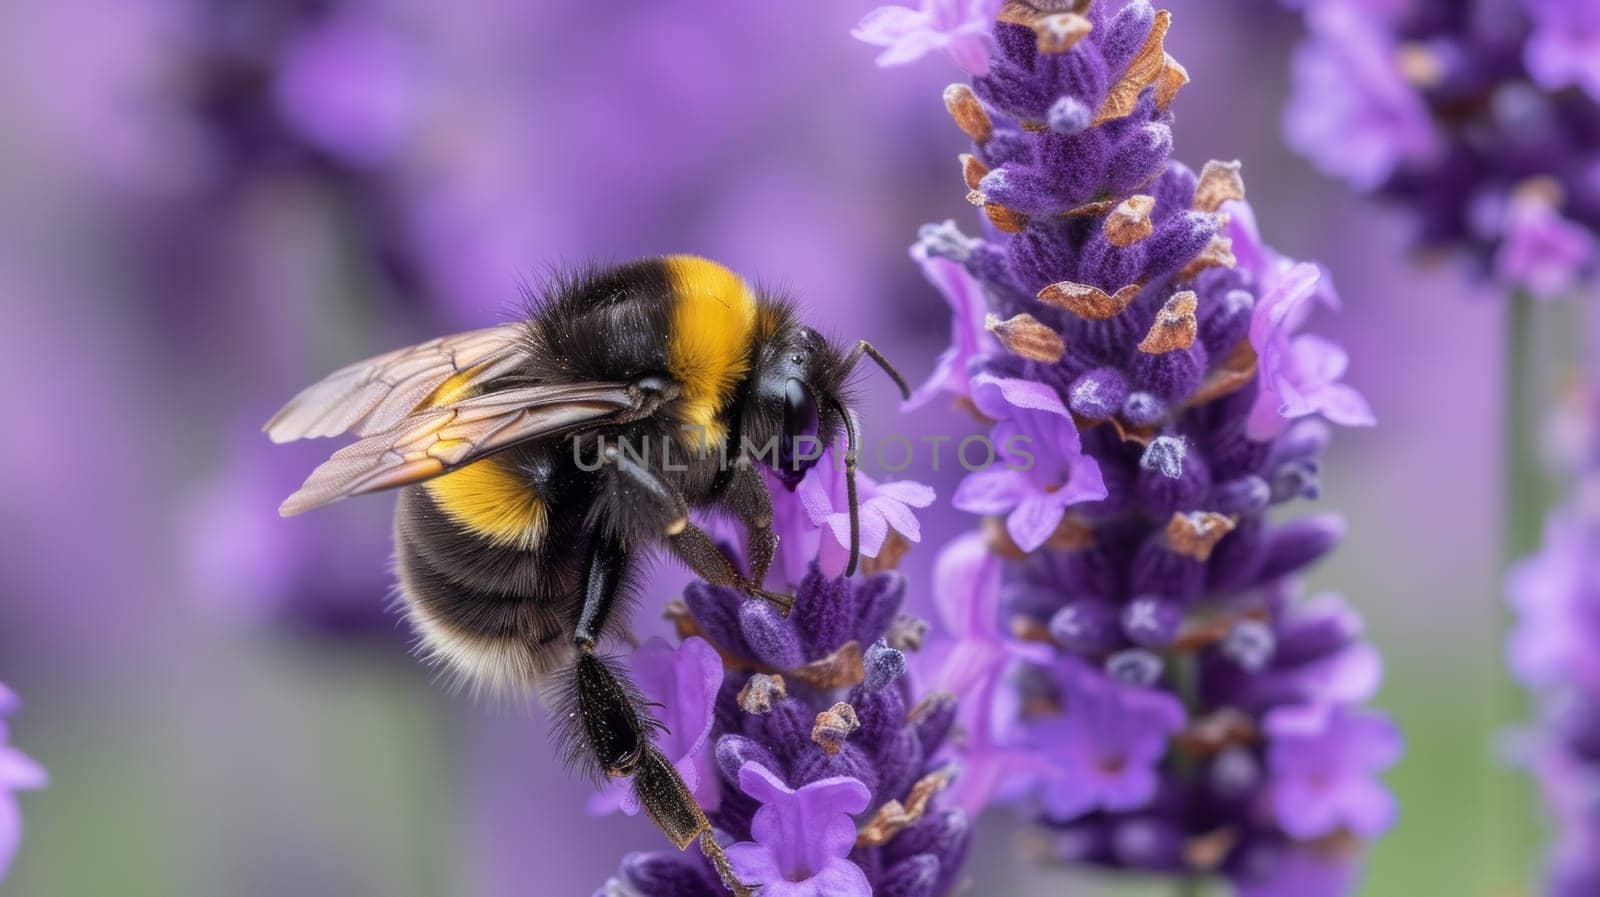 A bee is on a purple flower with green leaves